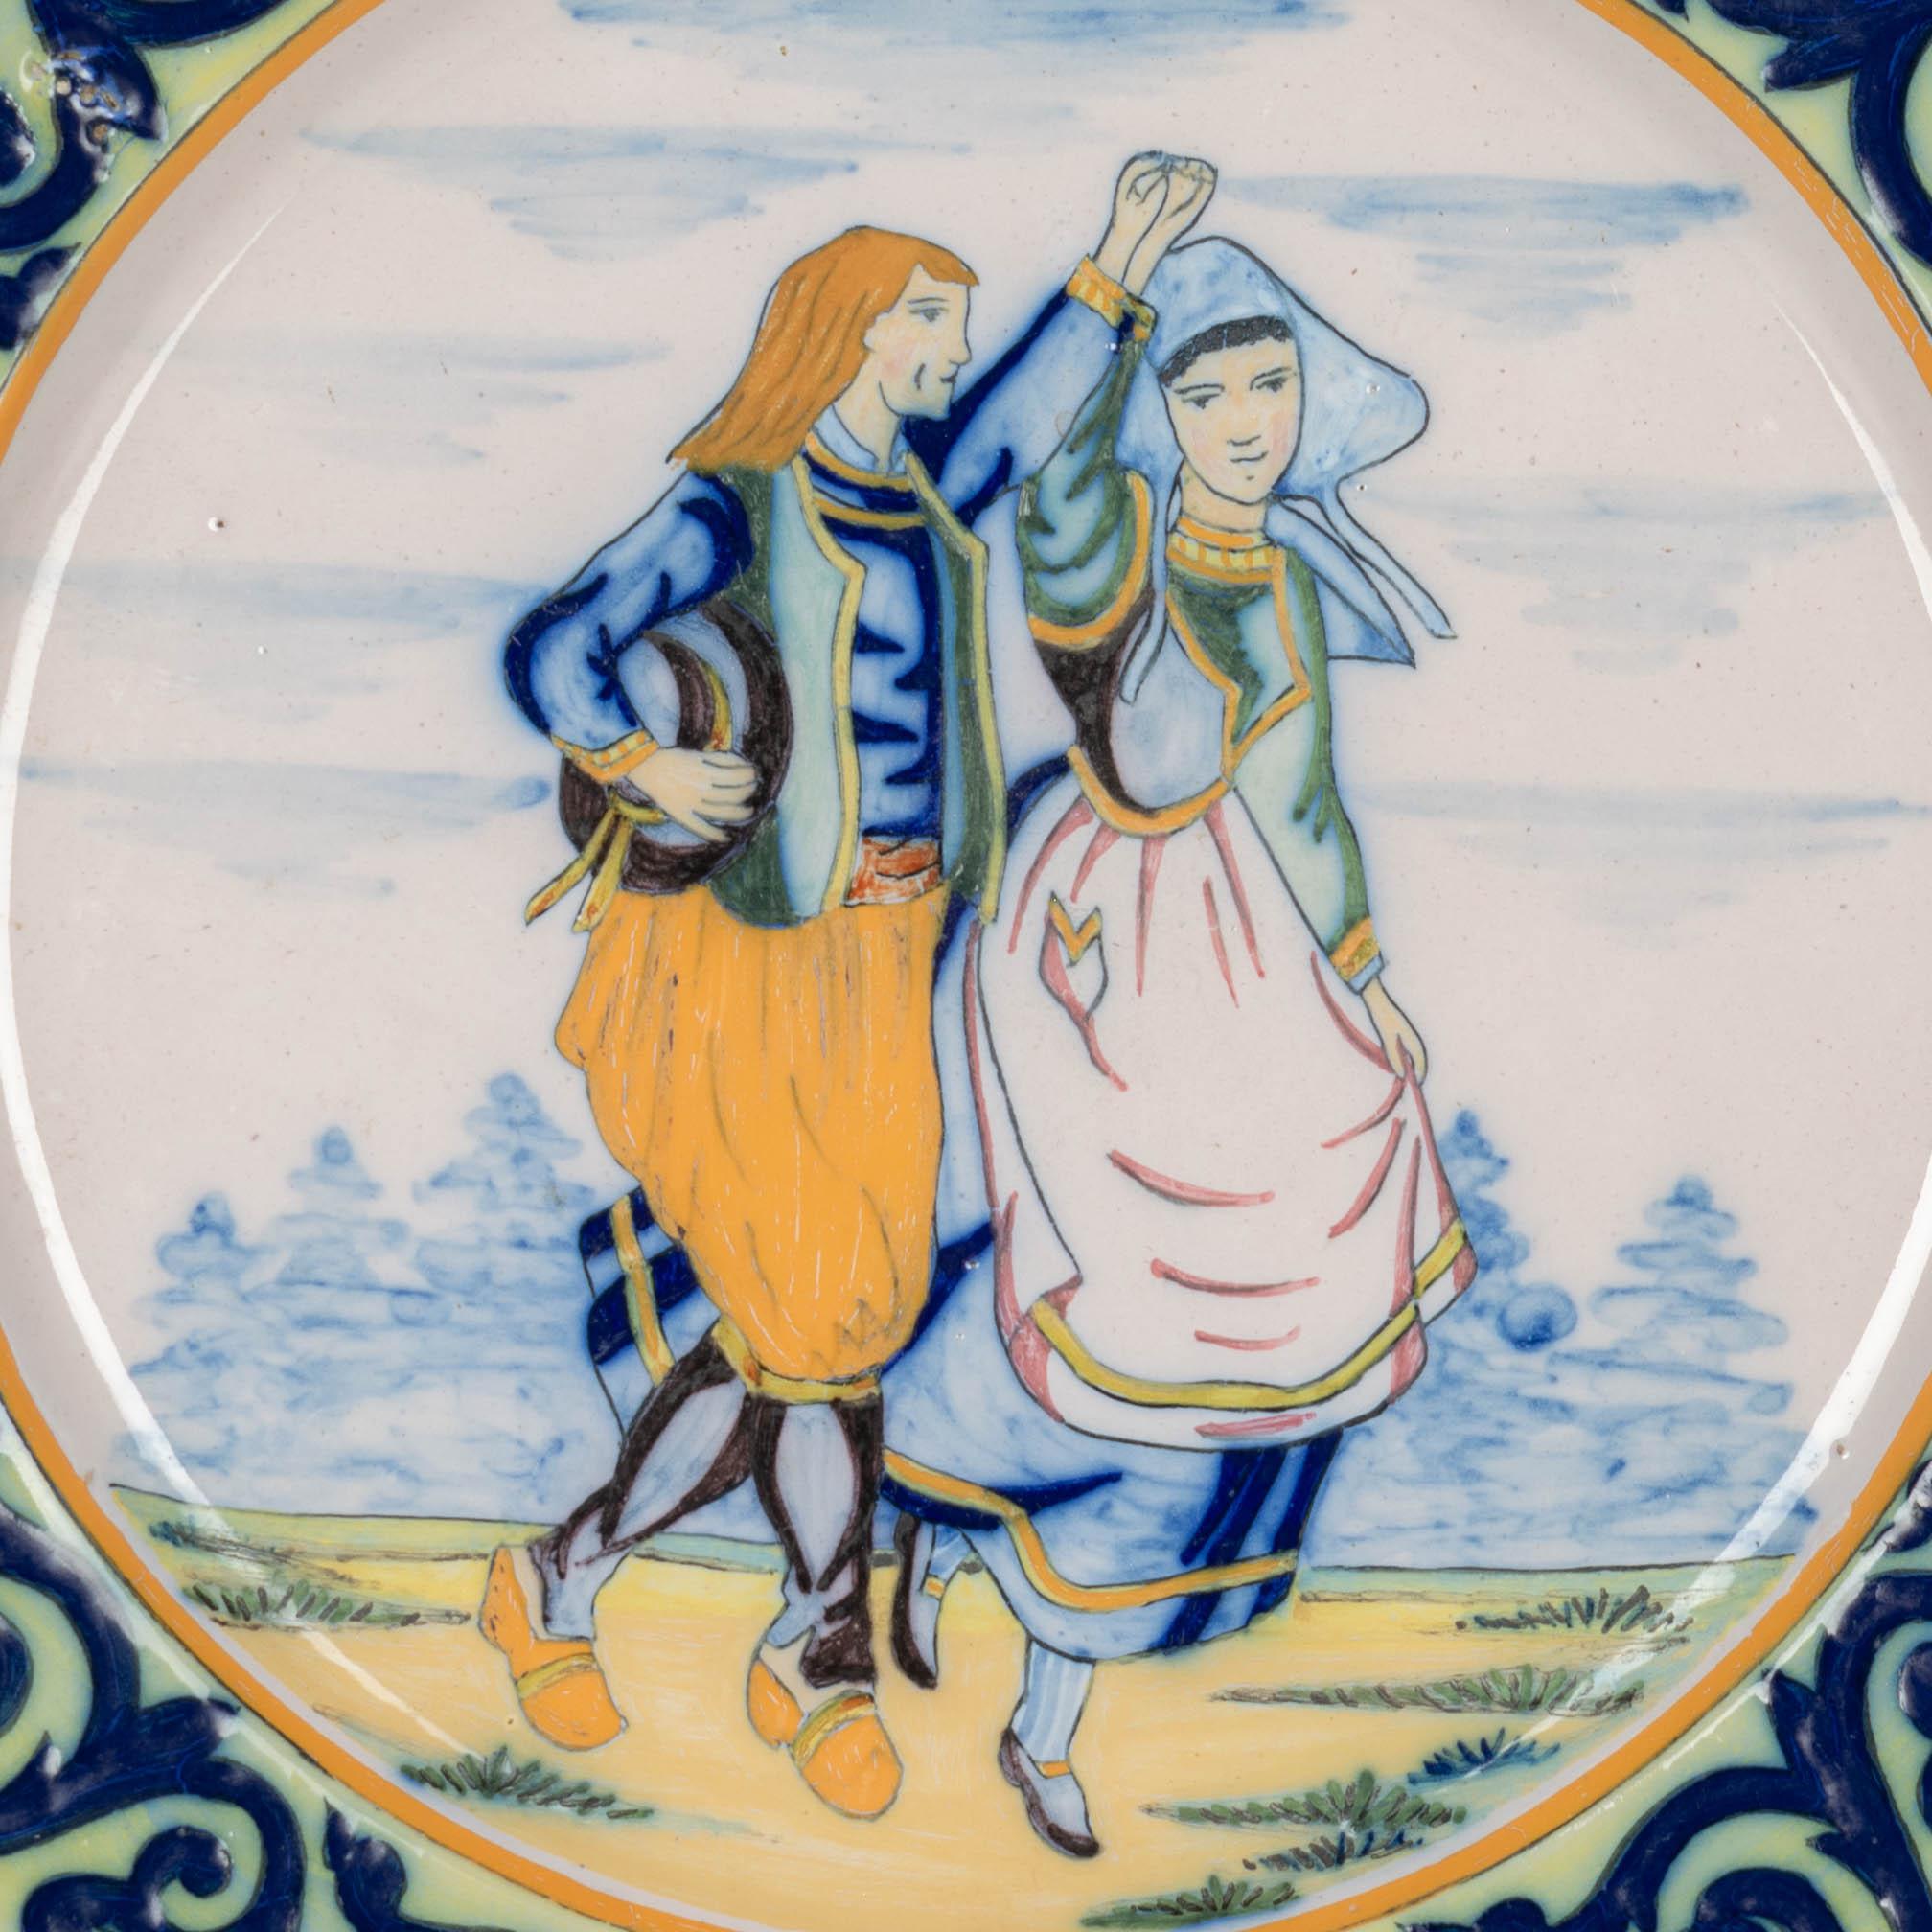 A Henriot Quimper French faience hand painted decorative plate, depicting a Breton couple dancing. Blue foliate border with Quimper crest at the top. A good quality, thick plate with minor loss to glaze. Mark on back: HR Quimper.